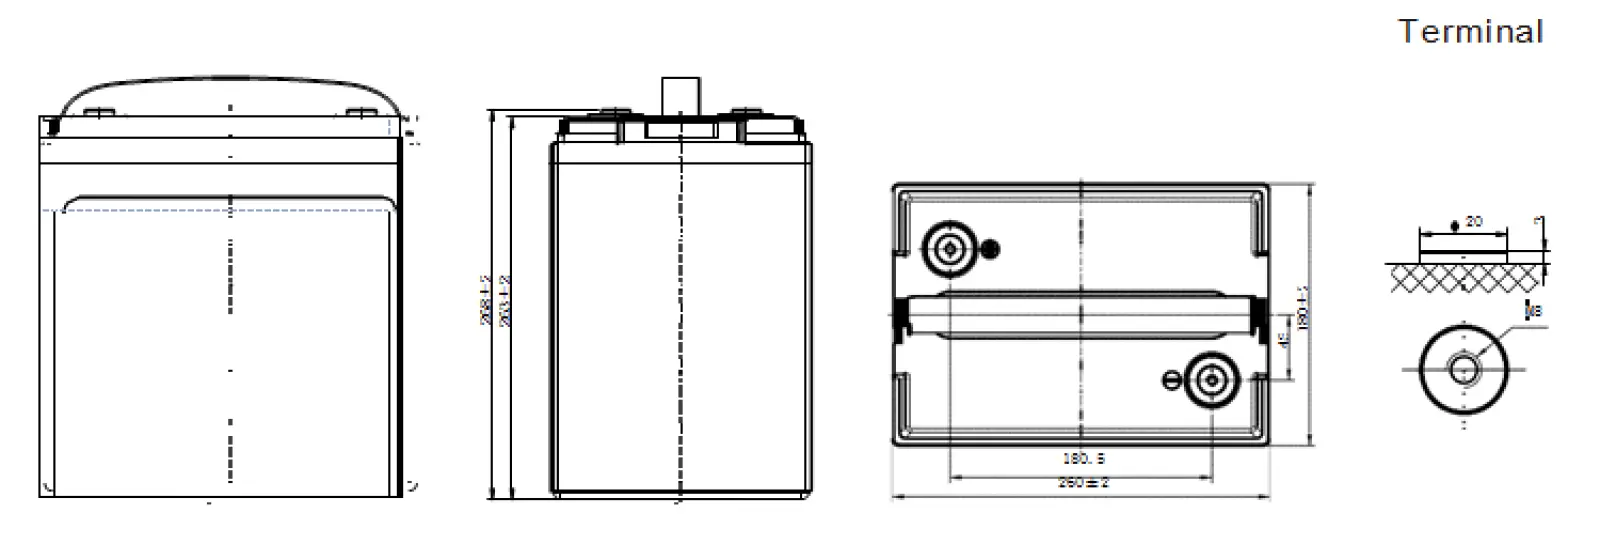 ABS6-270C Battery Dimensions